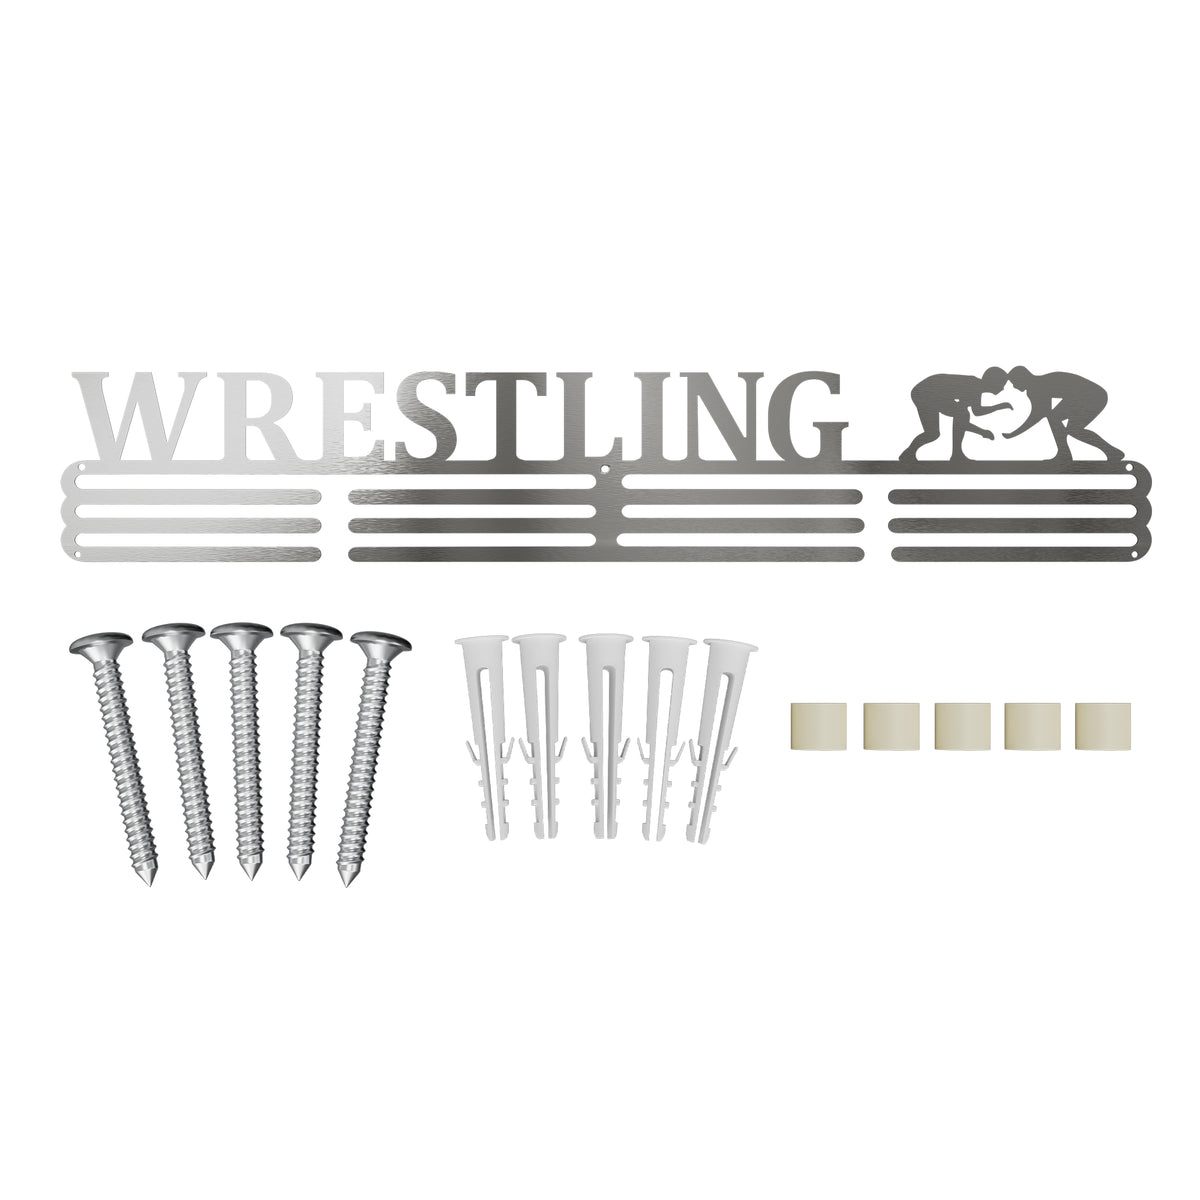 3 Bar Wrestling Medal Hanger with Accessories and all hardware